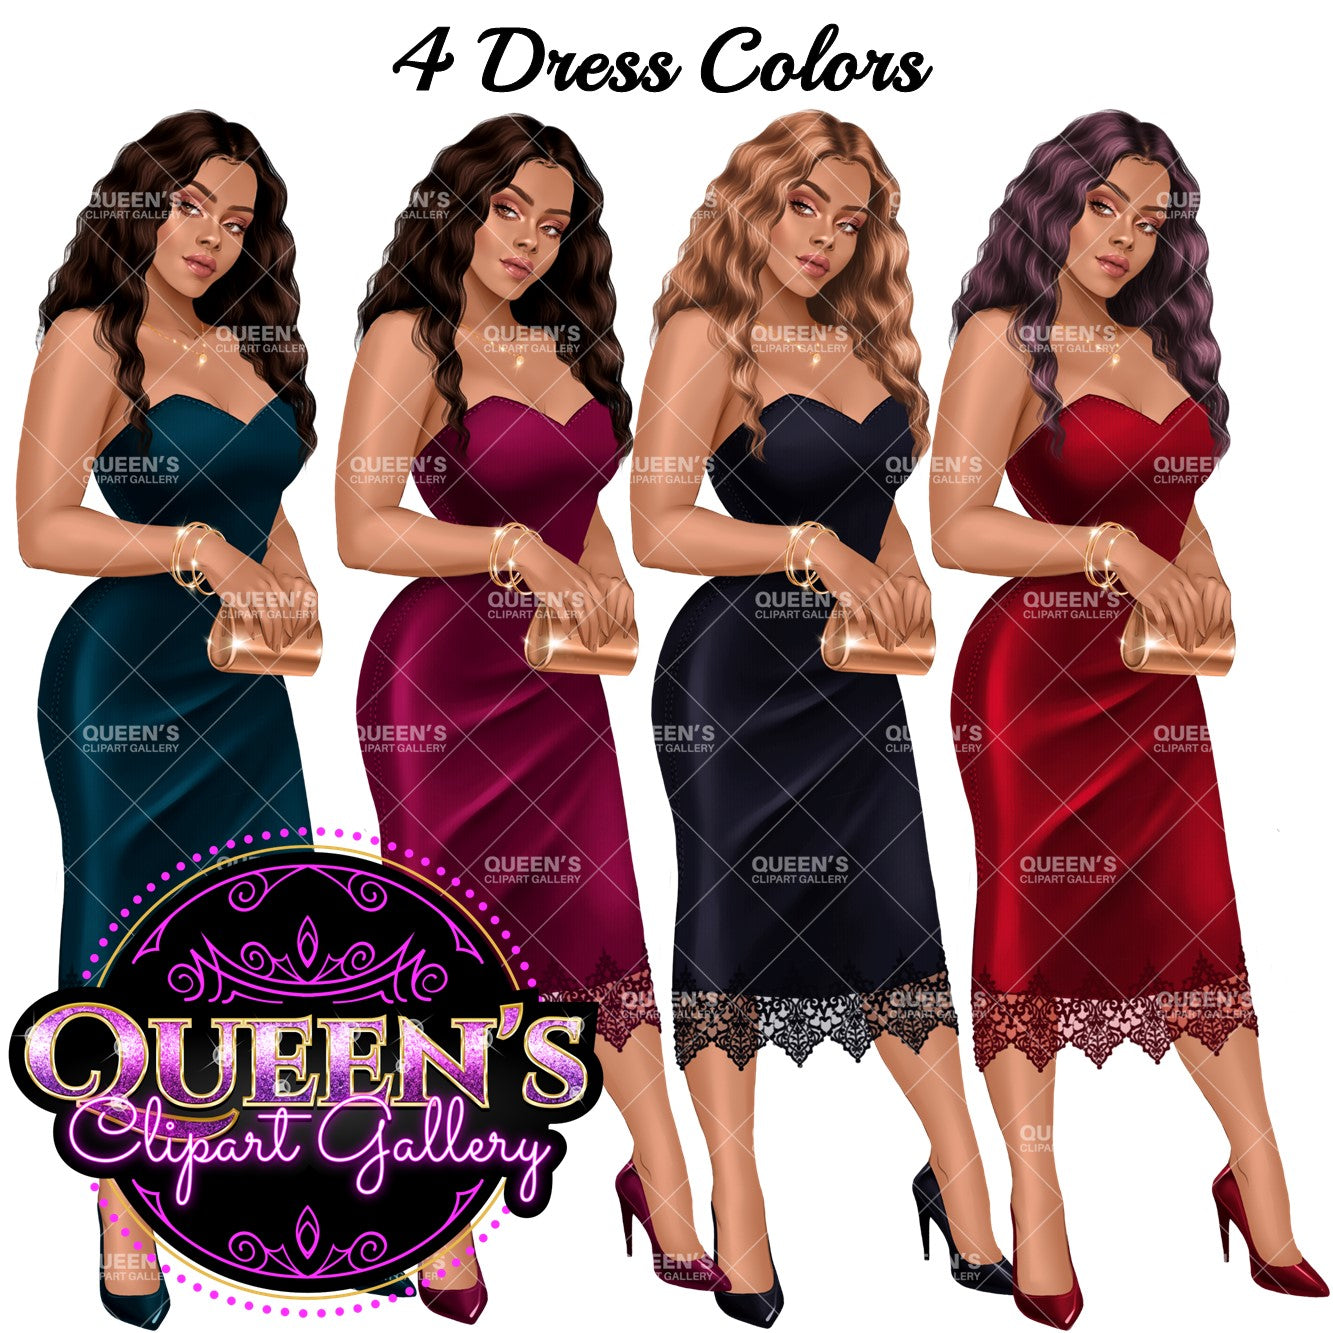 Woman in Red Dress, Lady boss, Woman clipart, Fashion girl clipart, Fashion illustration clipart, Curvy girl, Woman in dress, Fashion woman